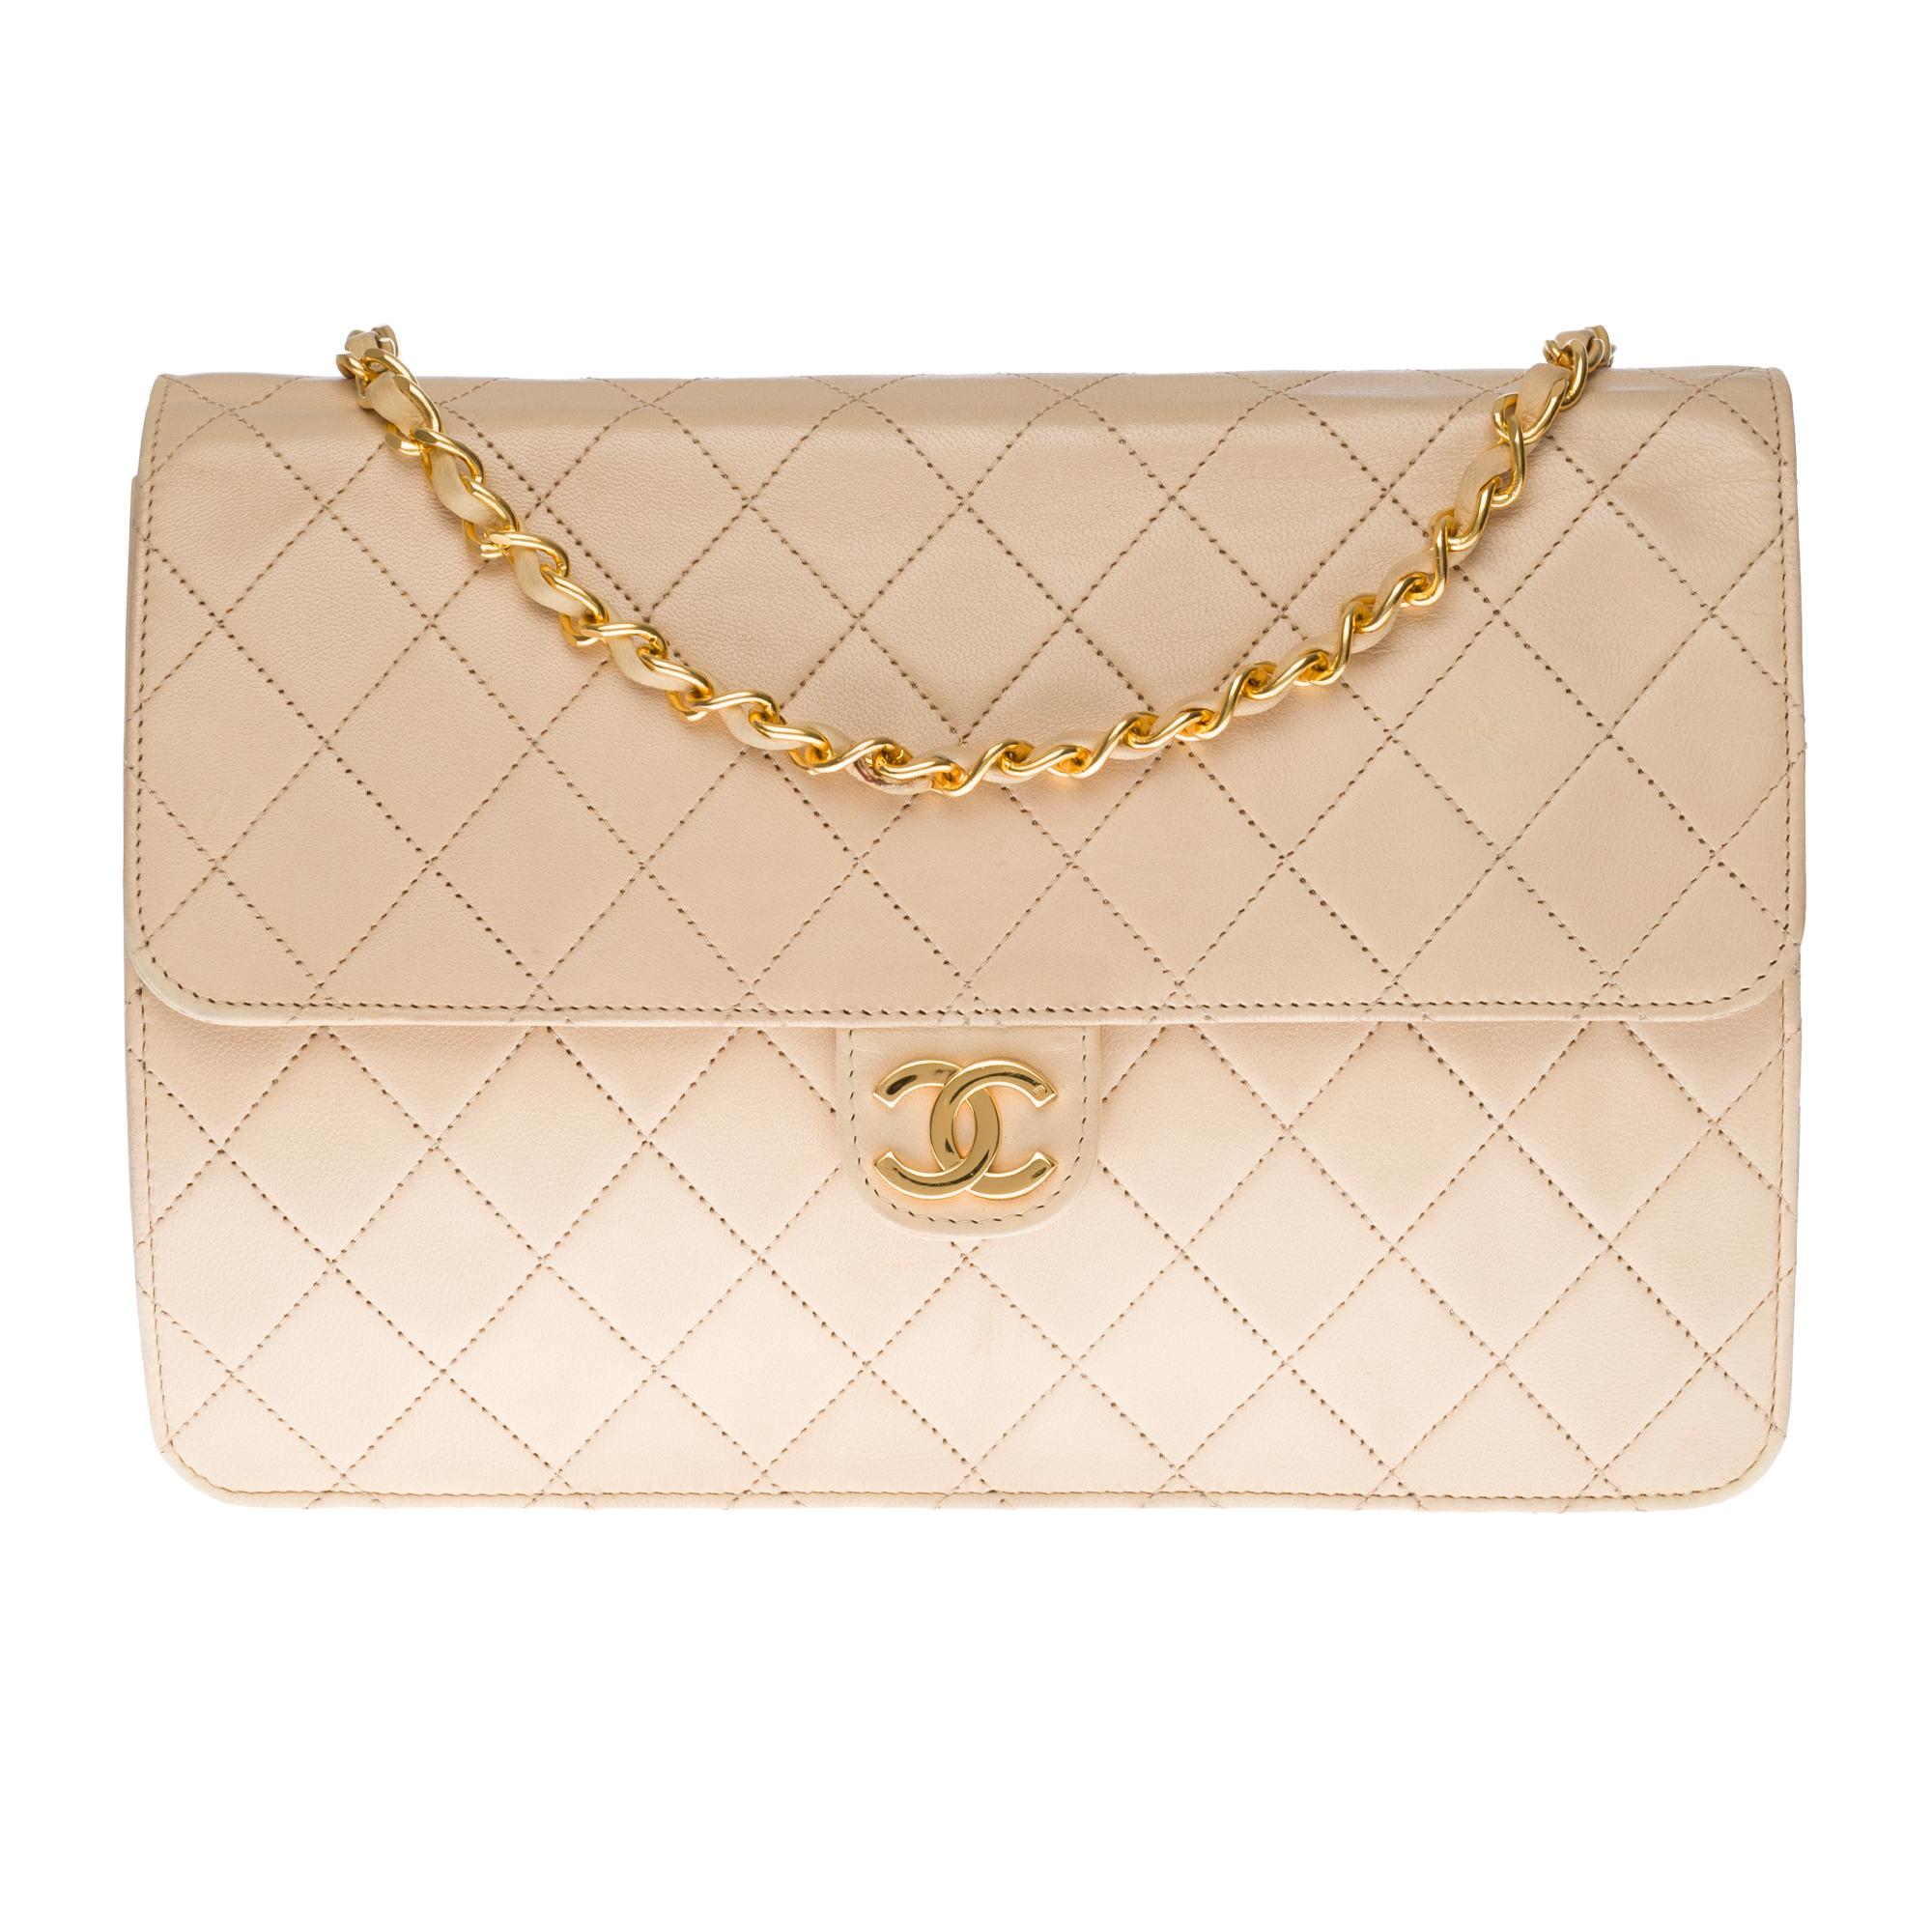 Chic Chanel Classique shoulder bag 25 cm in beige quilted lambskin leather, gold-tone metal hardware, a gold-tone metal chain handle intertwined with beige leather for a shoulder support .

Gilded metal logo closure on flap.
Lining in beige leather,